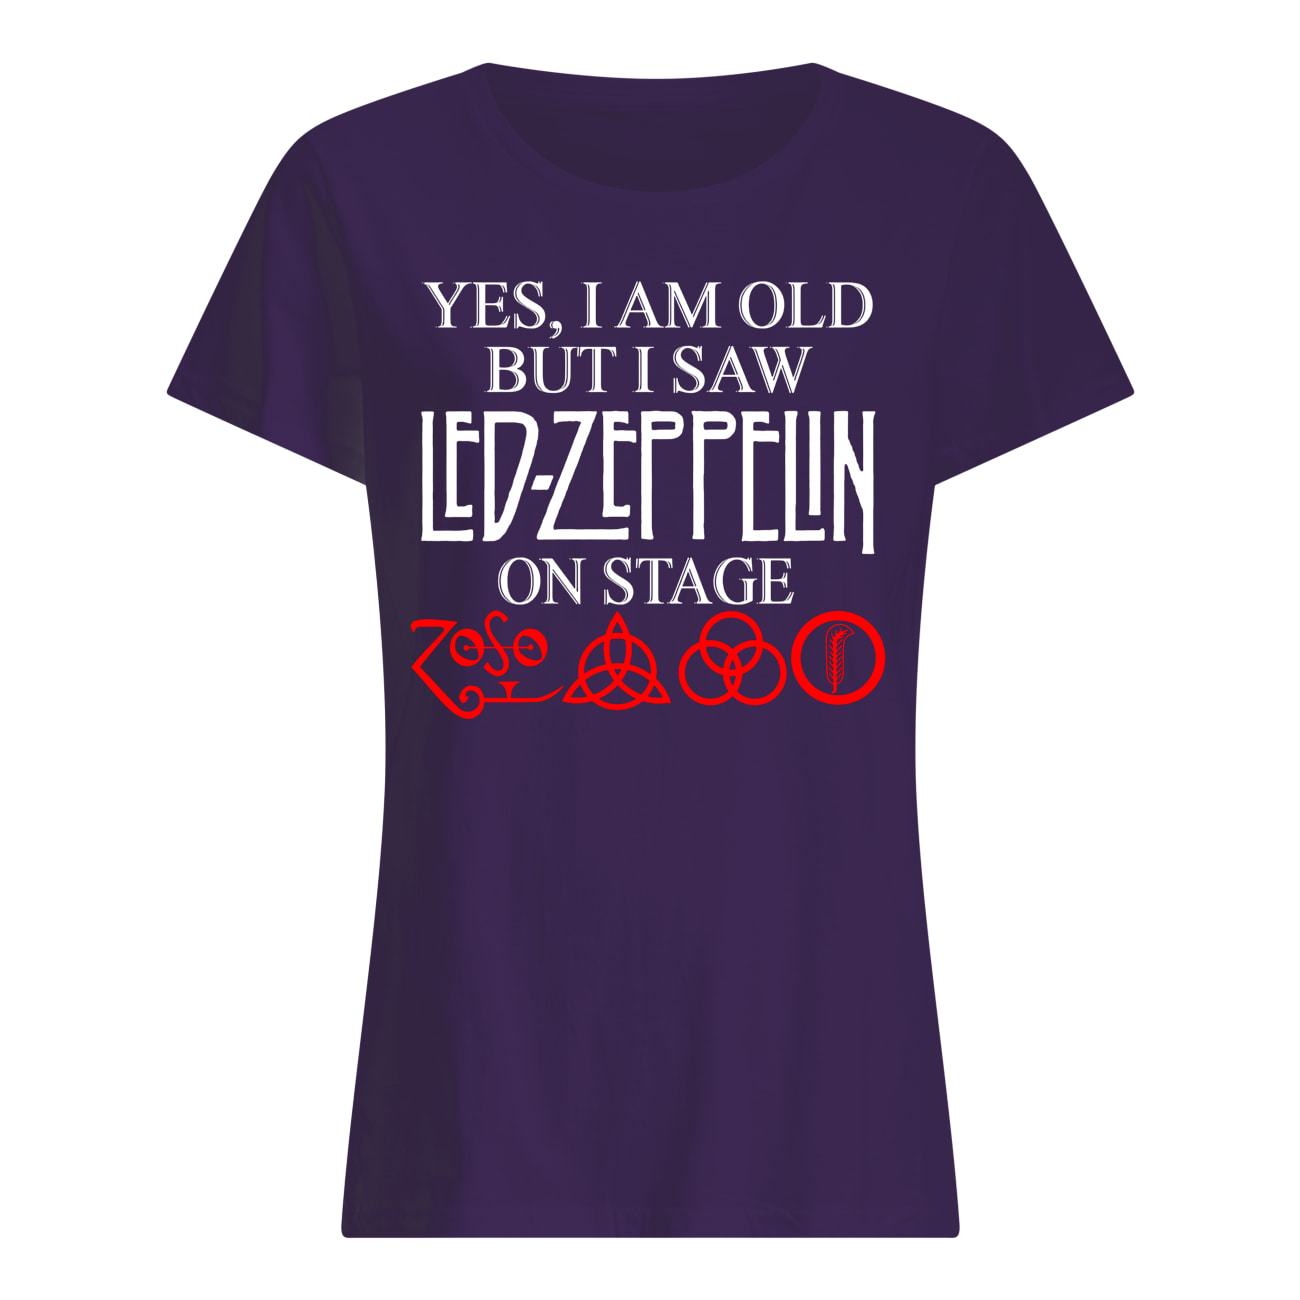 Yes i am old but i saw led-zeppelin on stage womens shirt